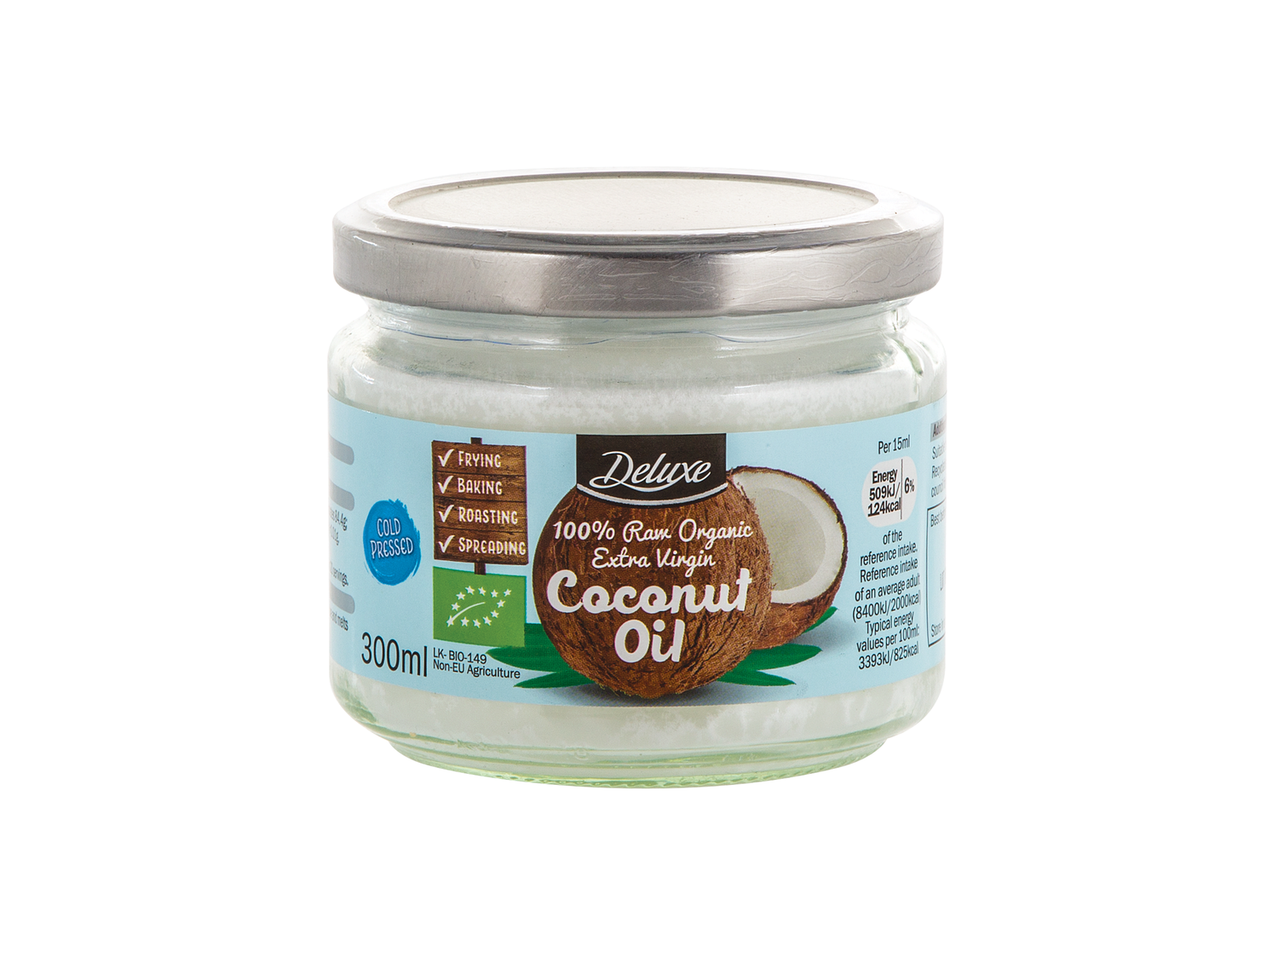 Go to full screen view: DELUXE® Organic Coconut Oil - Image 1